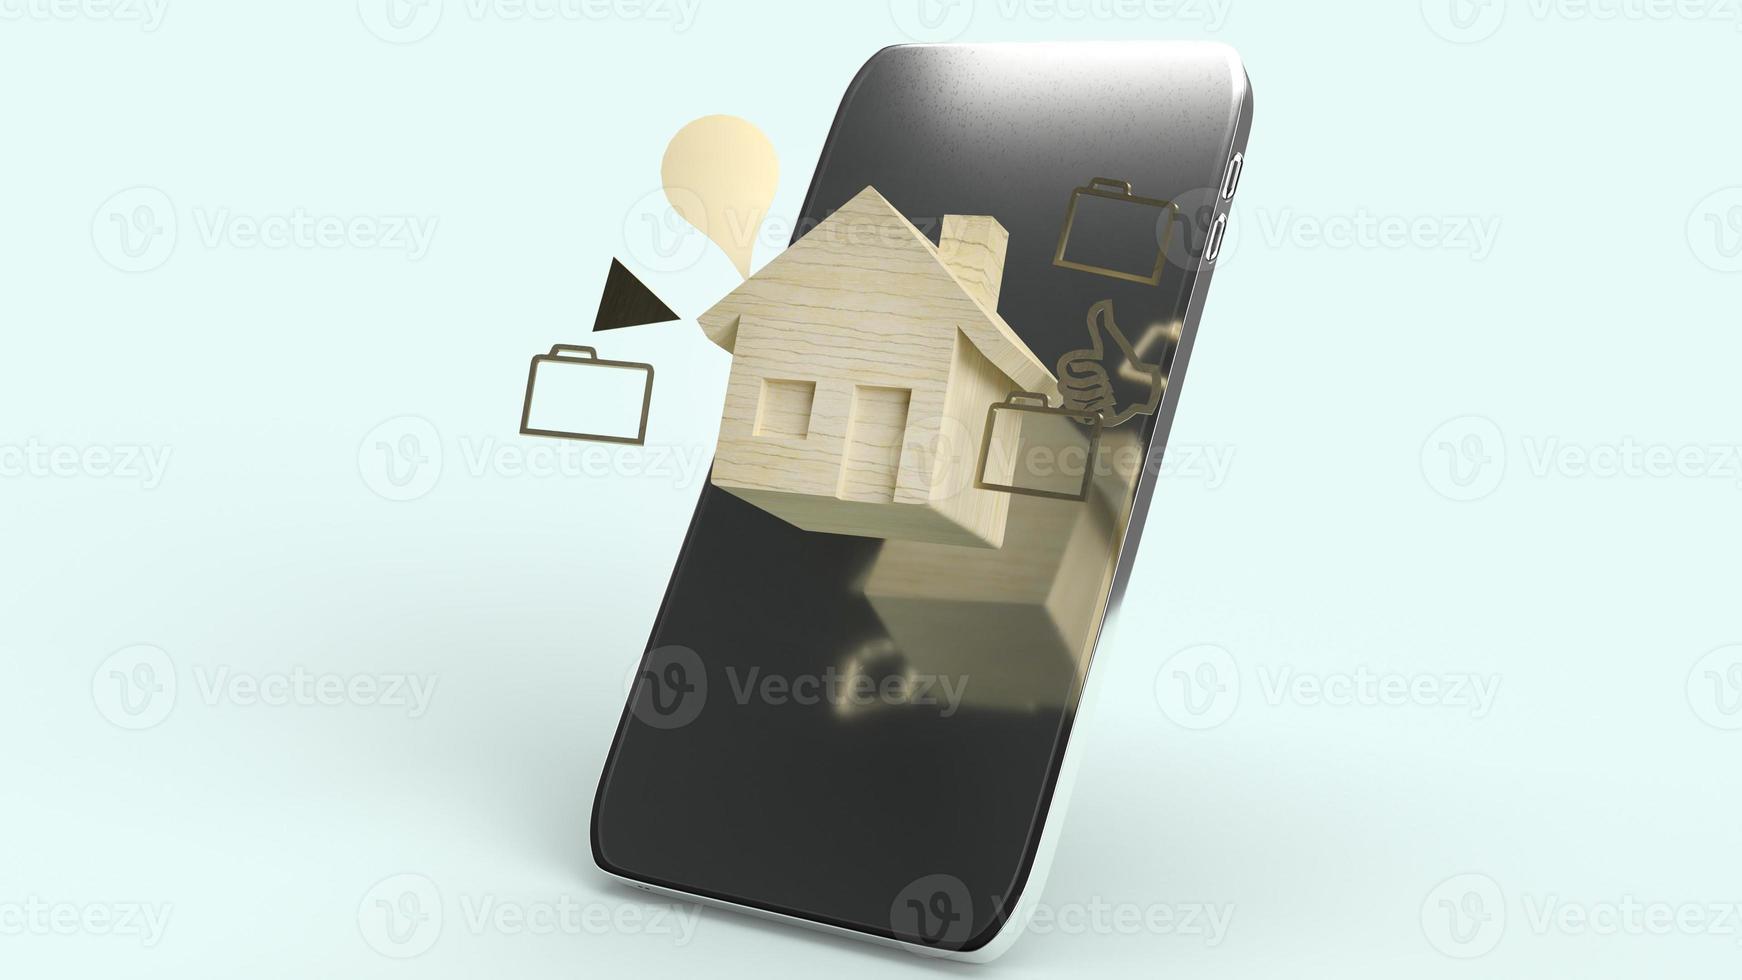 The home wooden toy and smartphone 3d rendering for technology content. photo